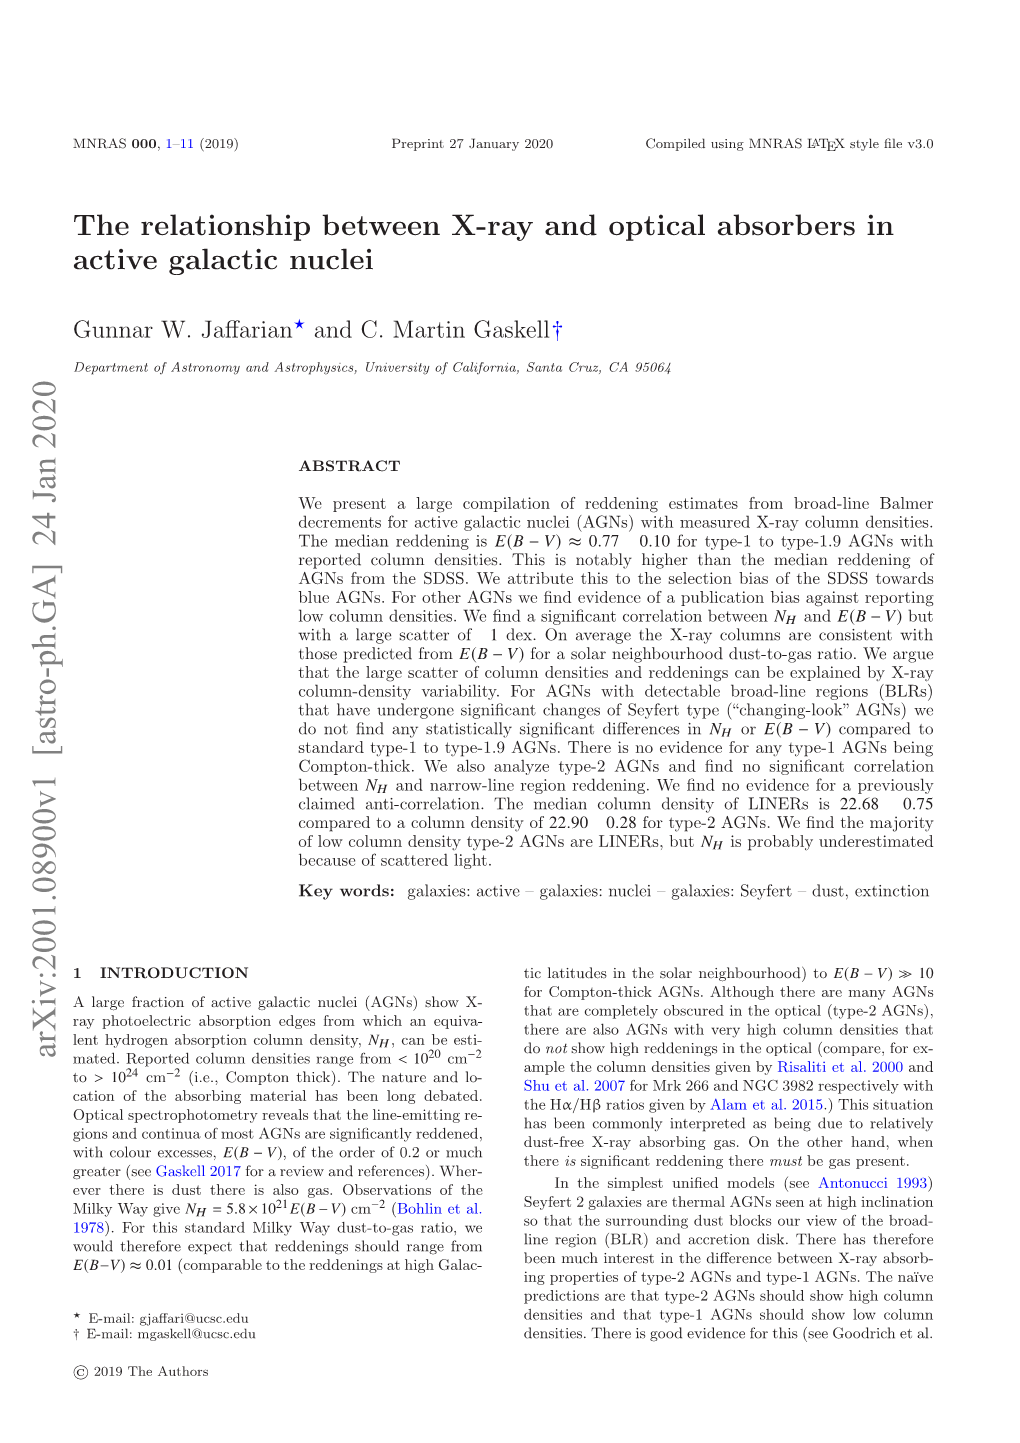 The Relationship Between X-Ray and Optical Absorbers in Active Galactic